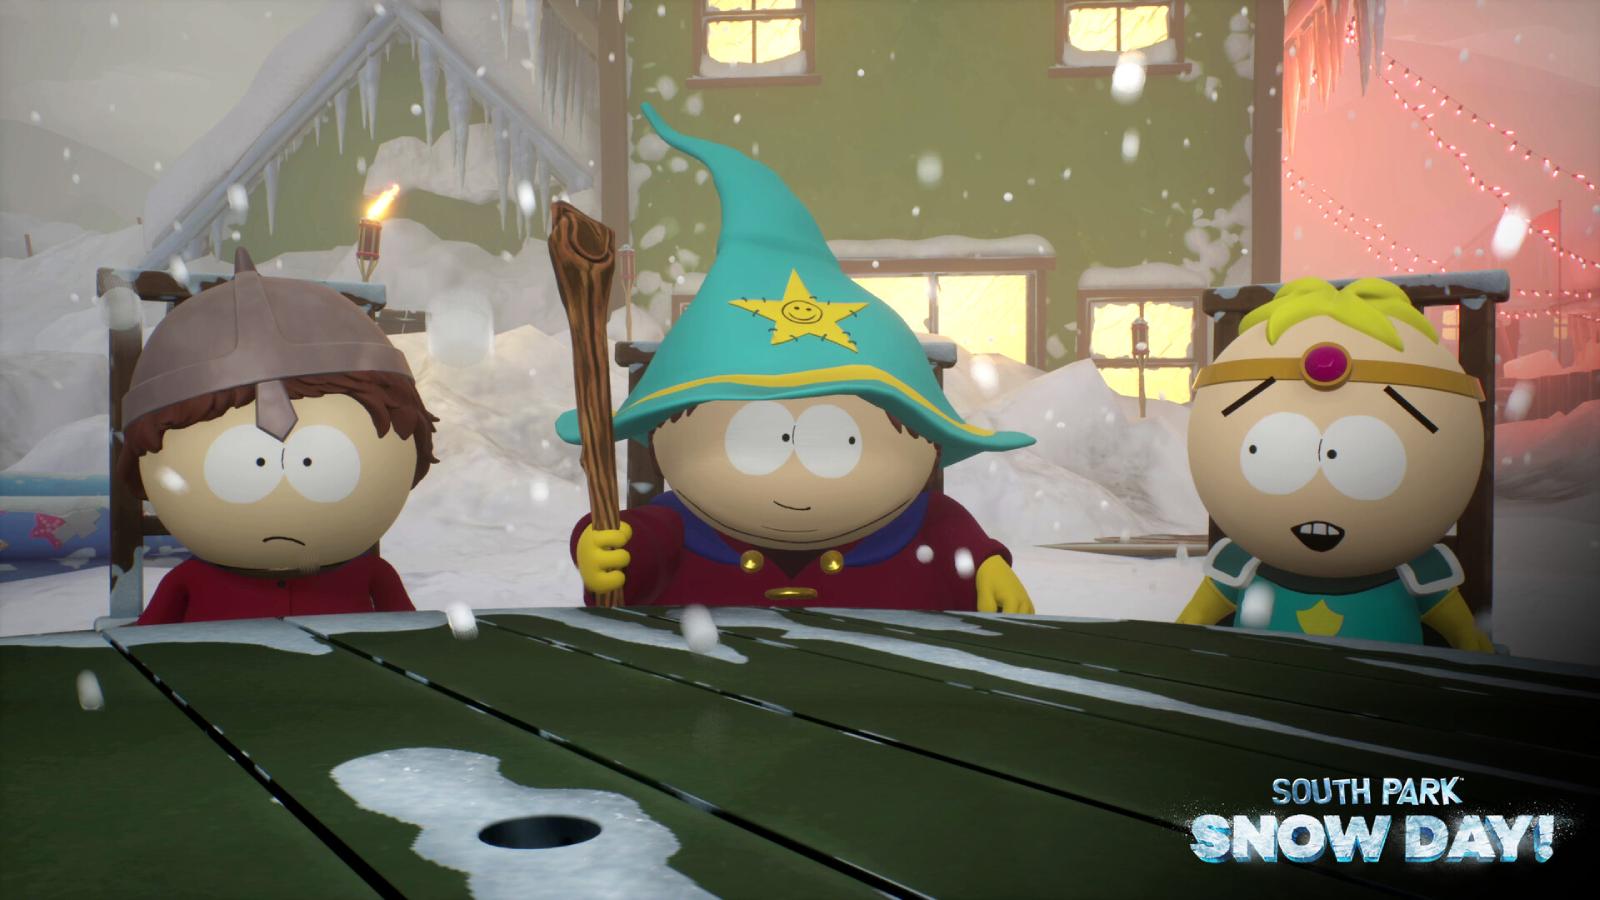 an image of some characters from South Park: Snow Day